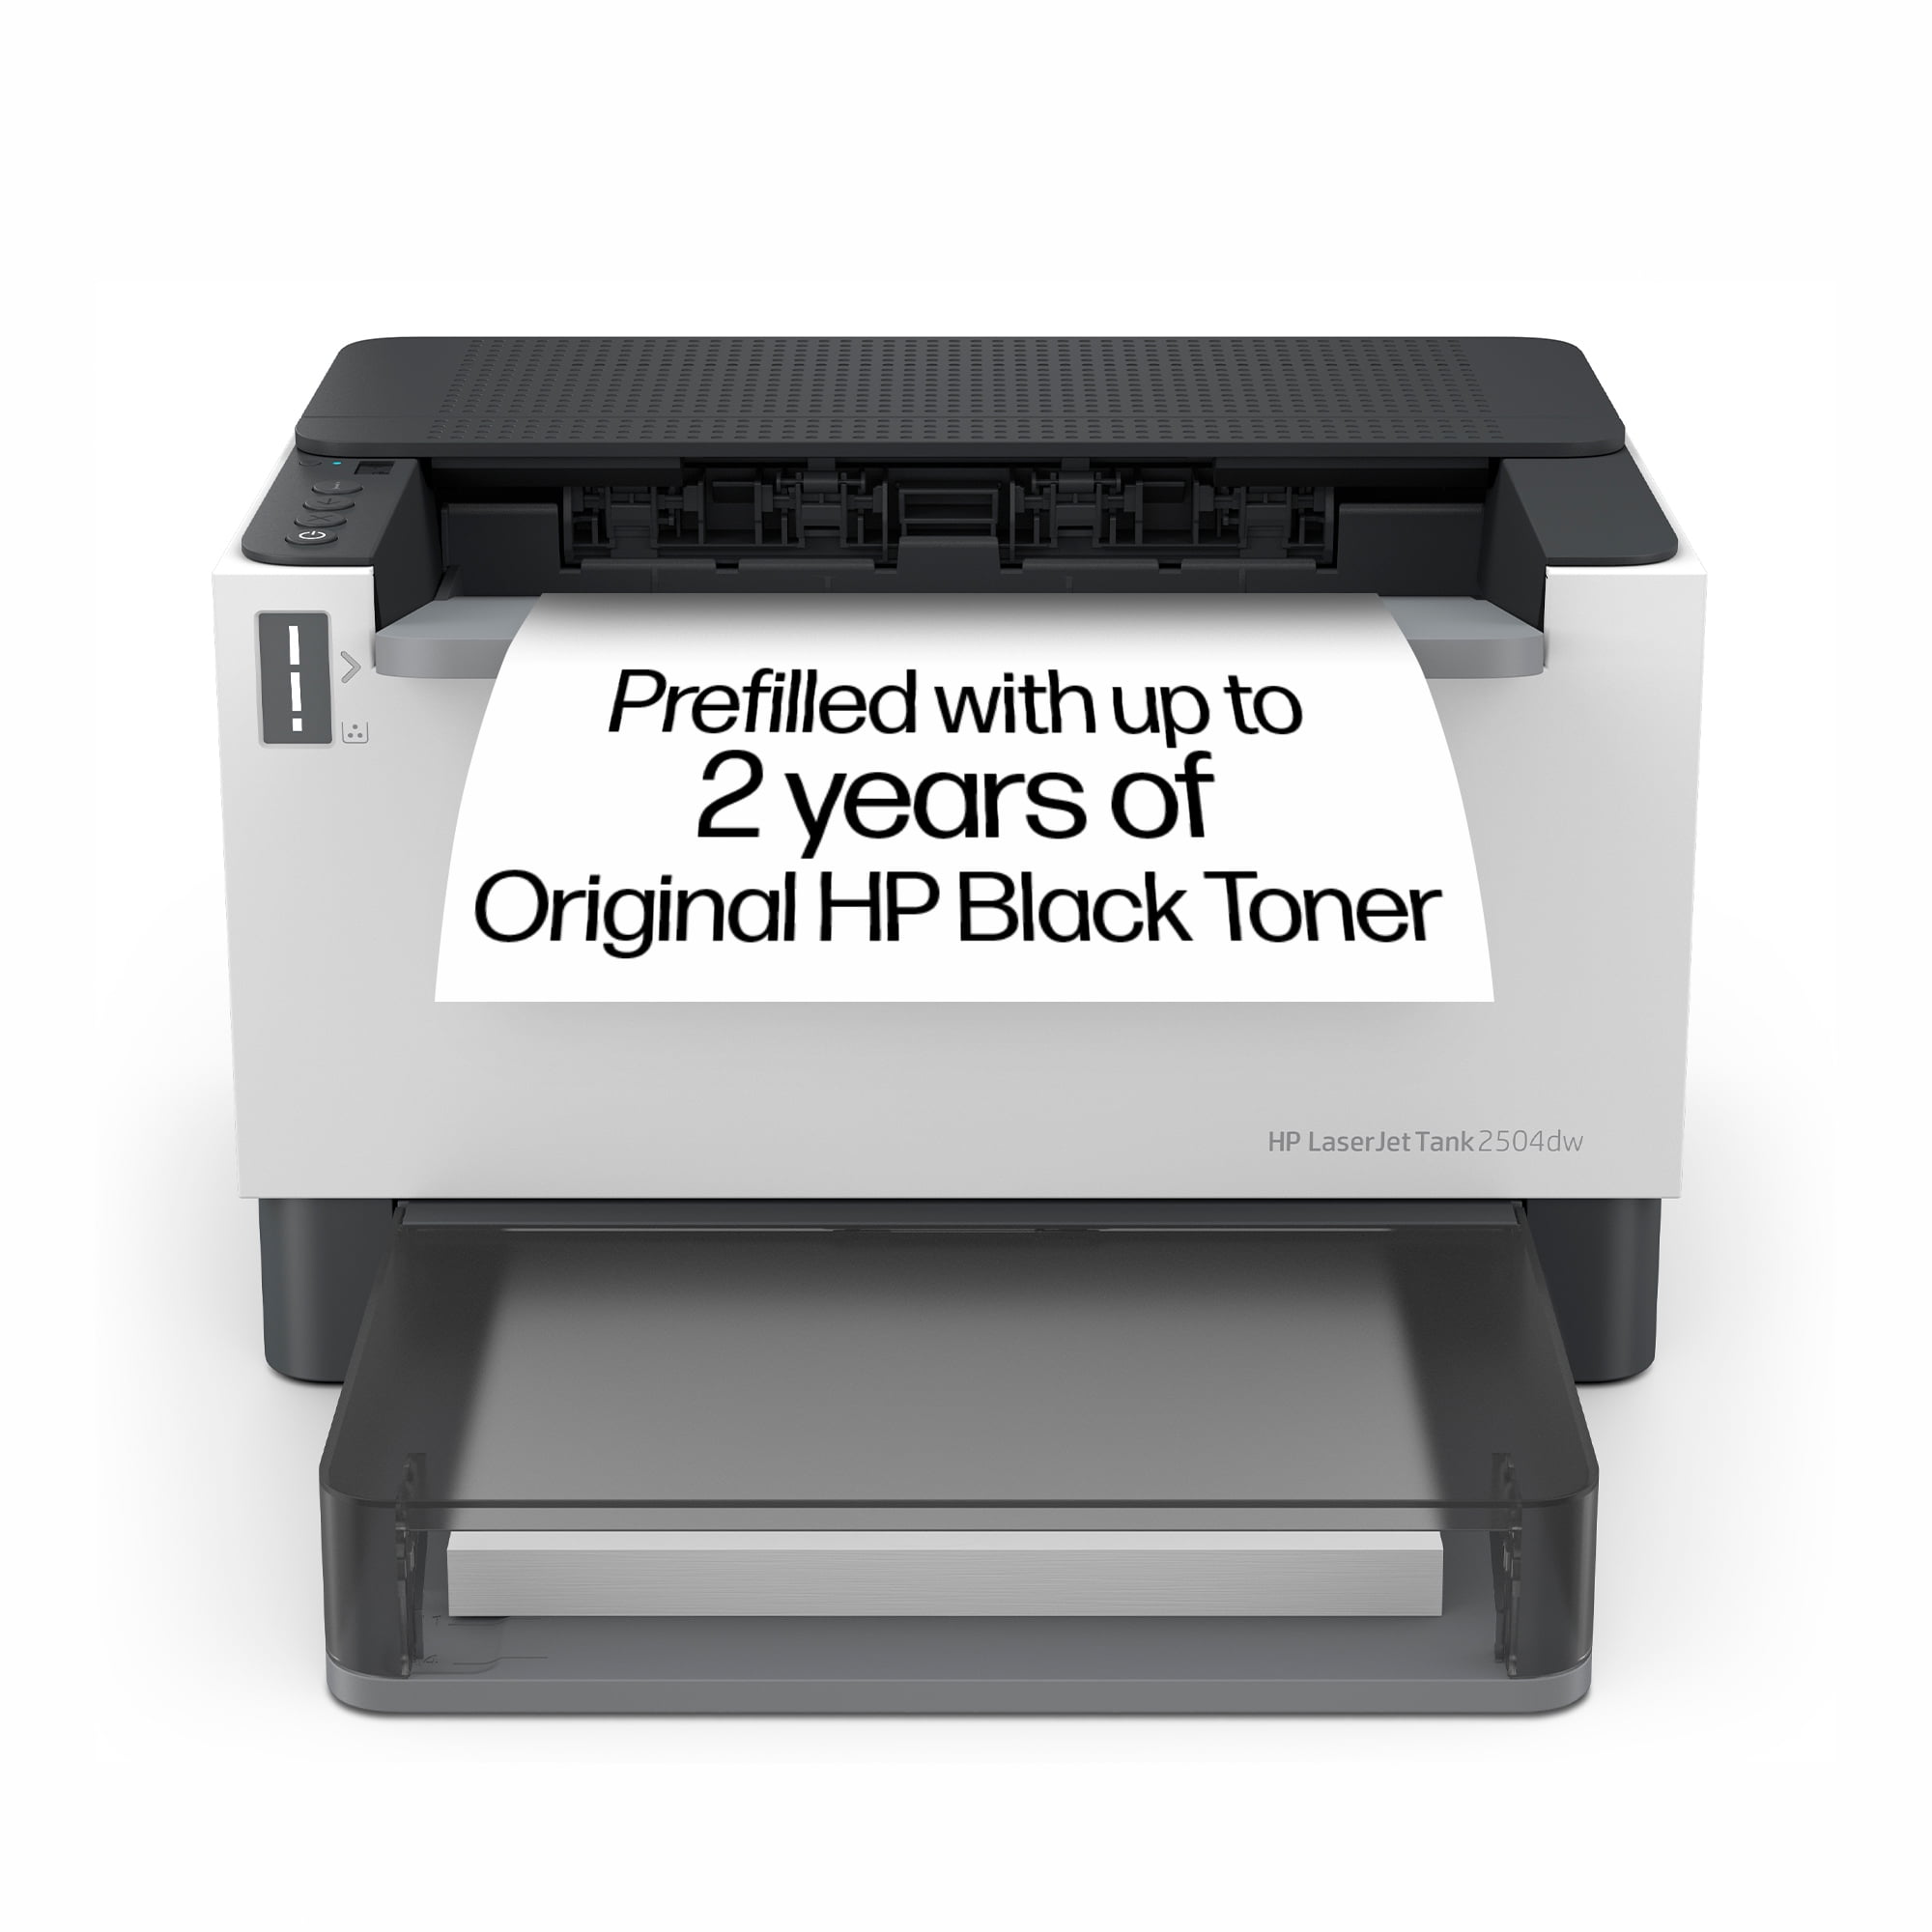 HP LaserJet Tank 2504dw Wireless Black-and-White Laser Printer with up to 5,000 pages -